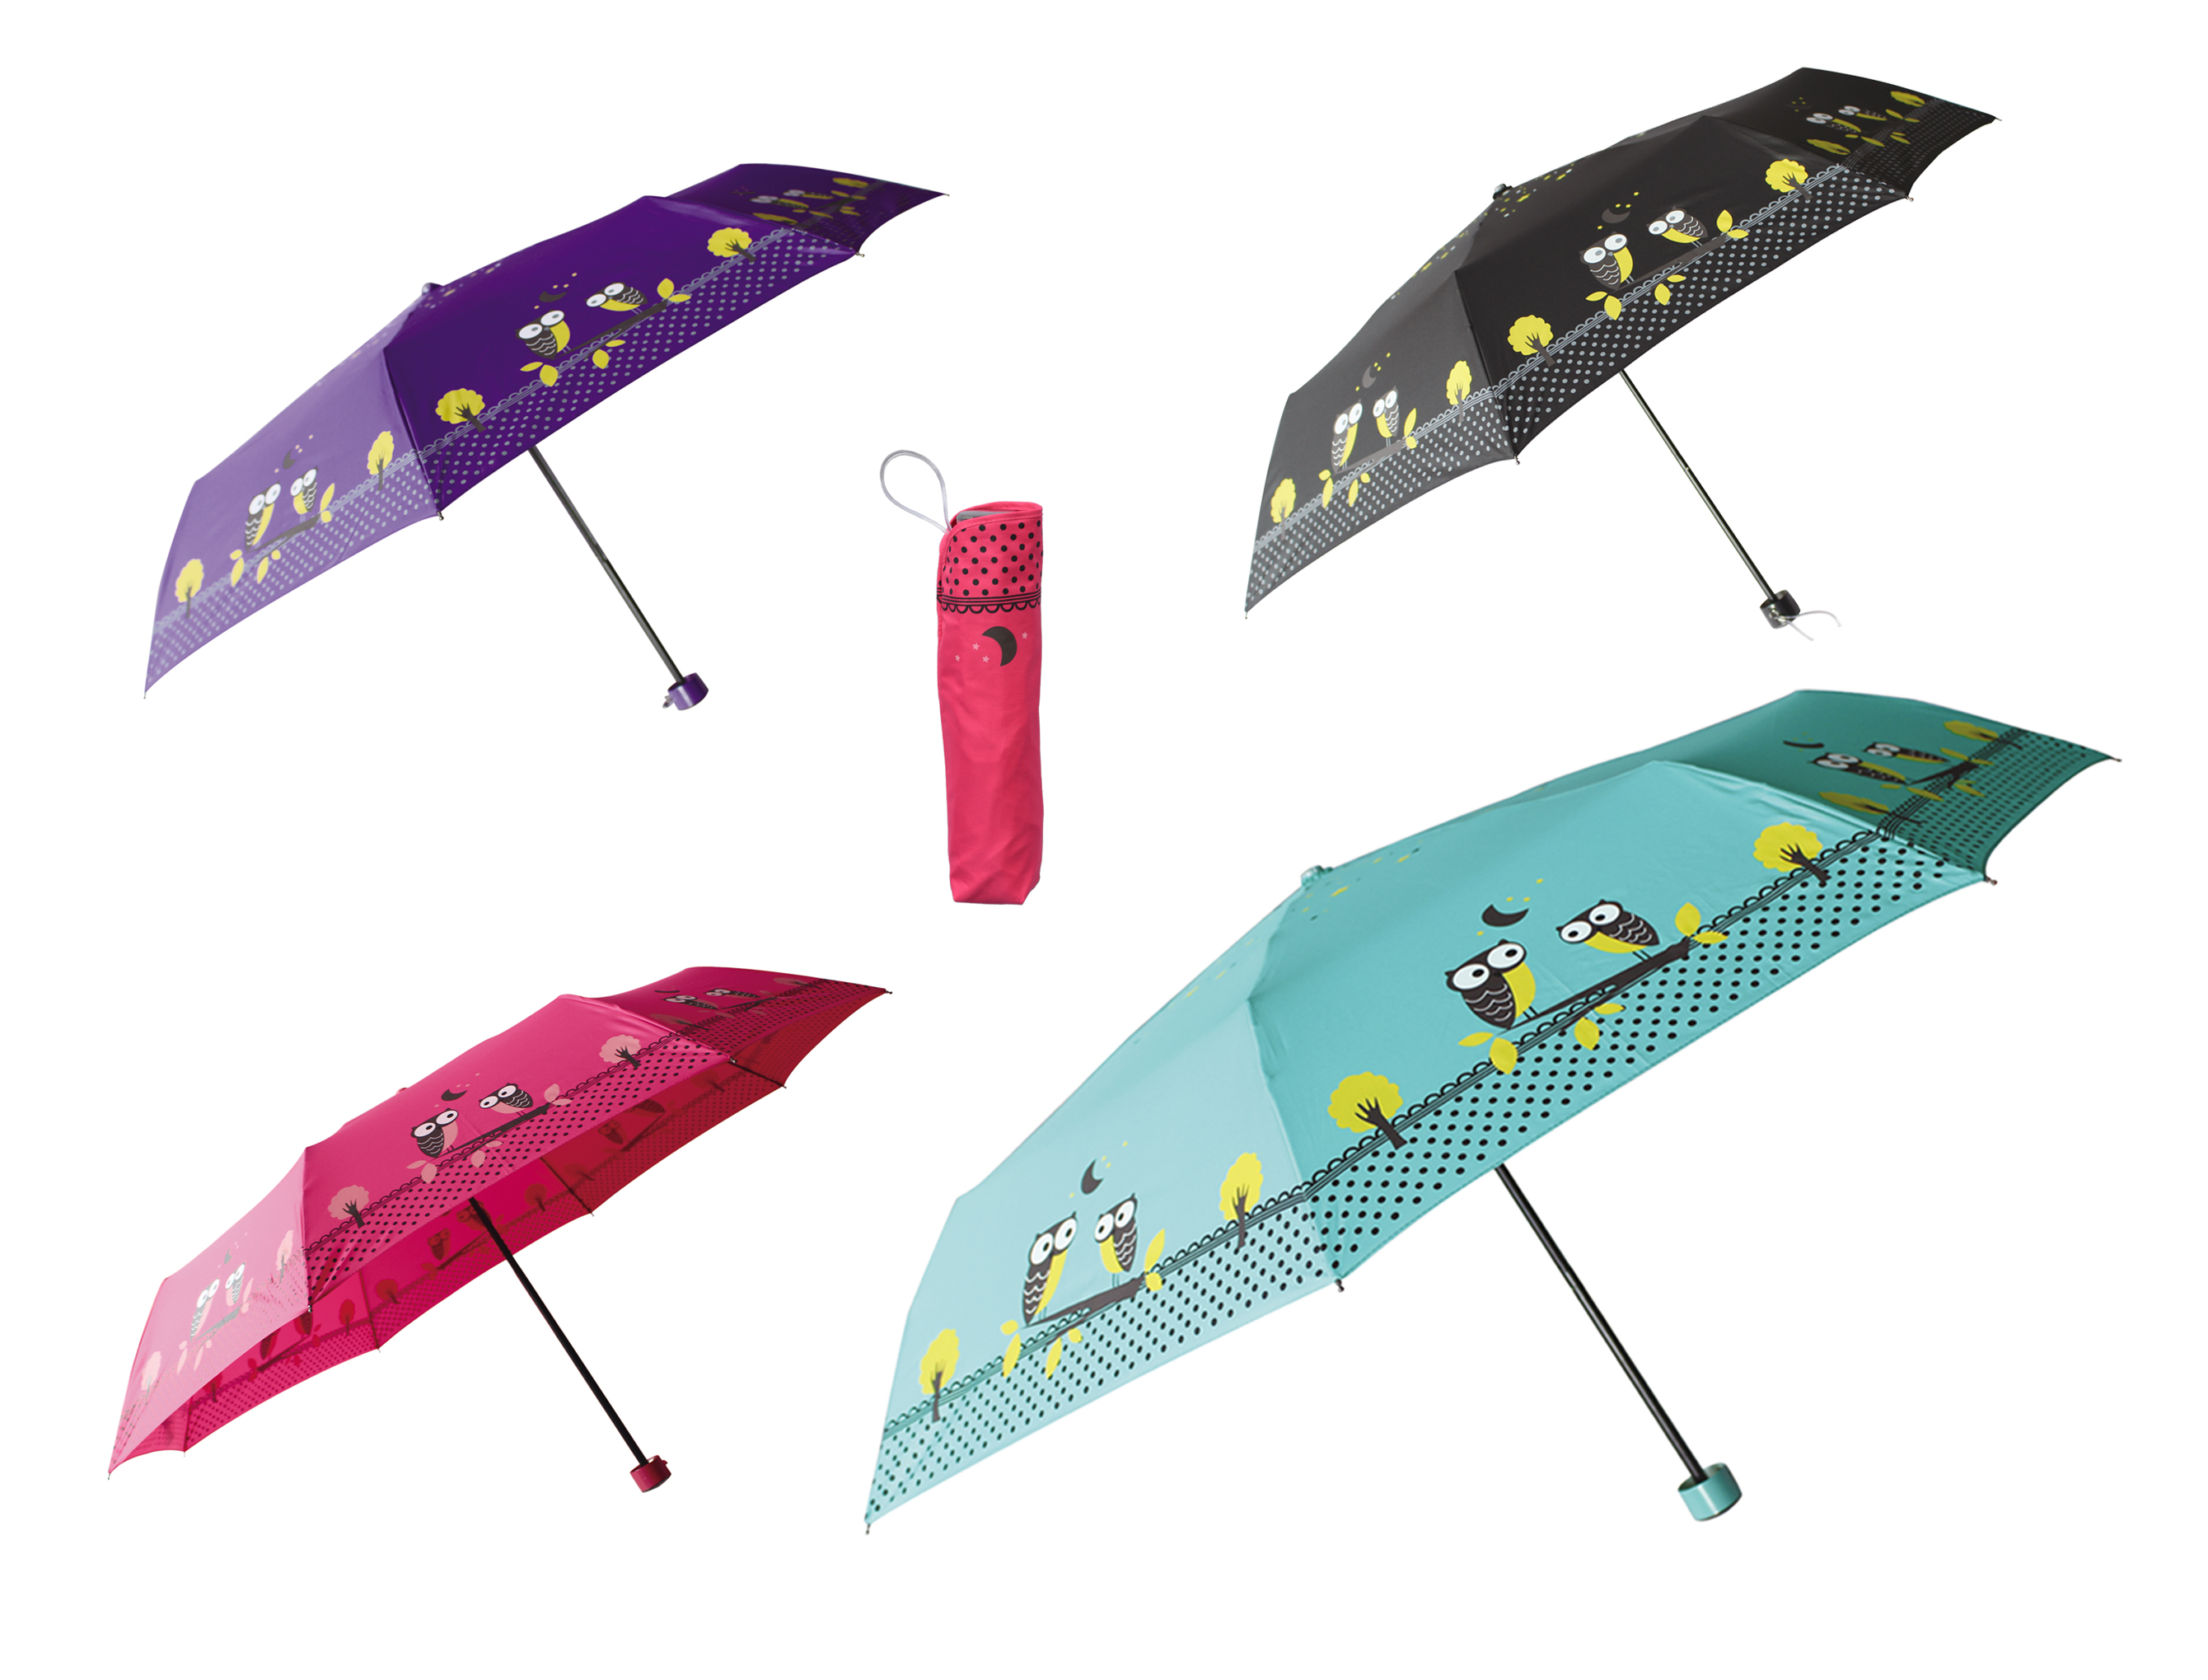 NA Flora Background Automatic Tri-fold Umbrella Outer Print One Size